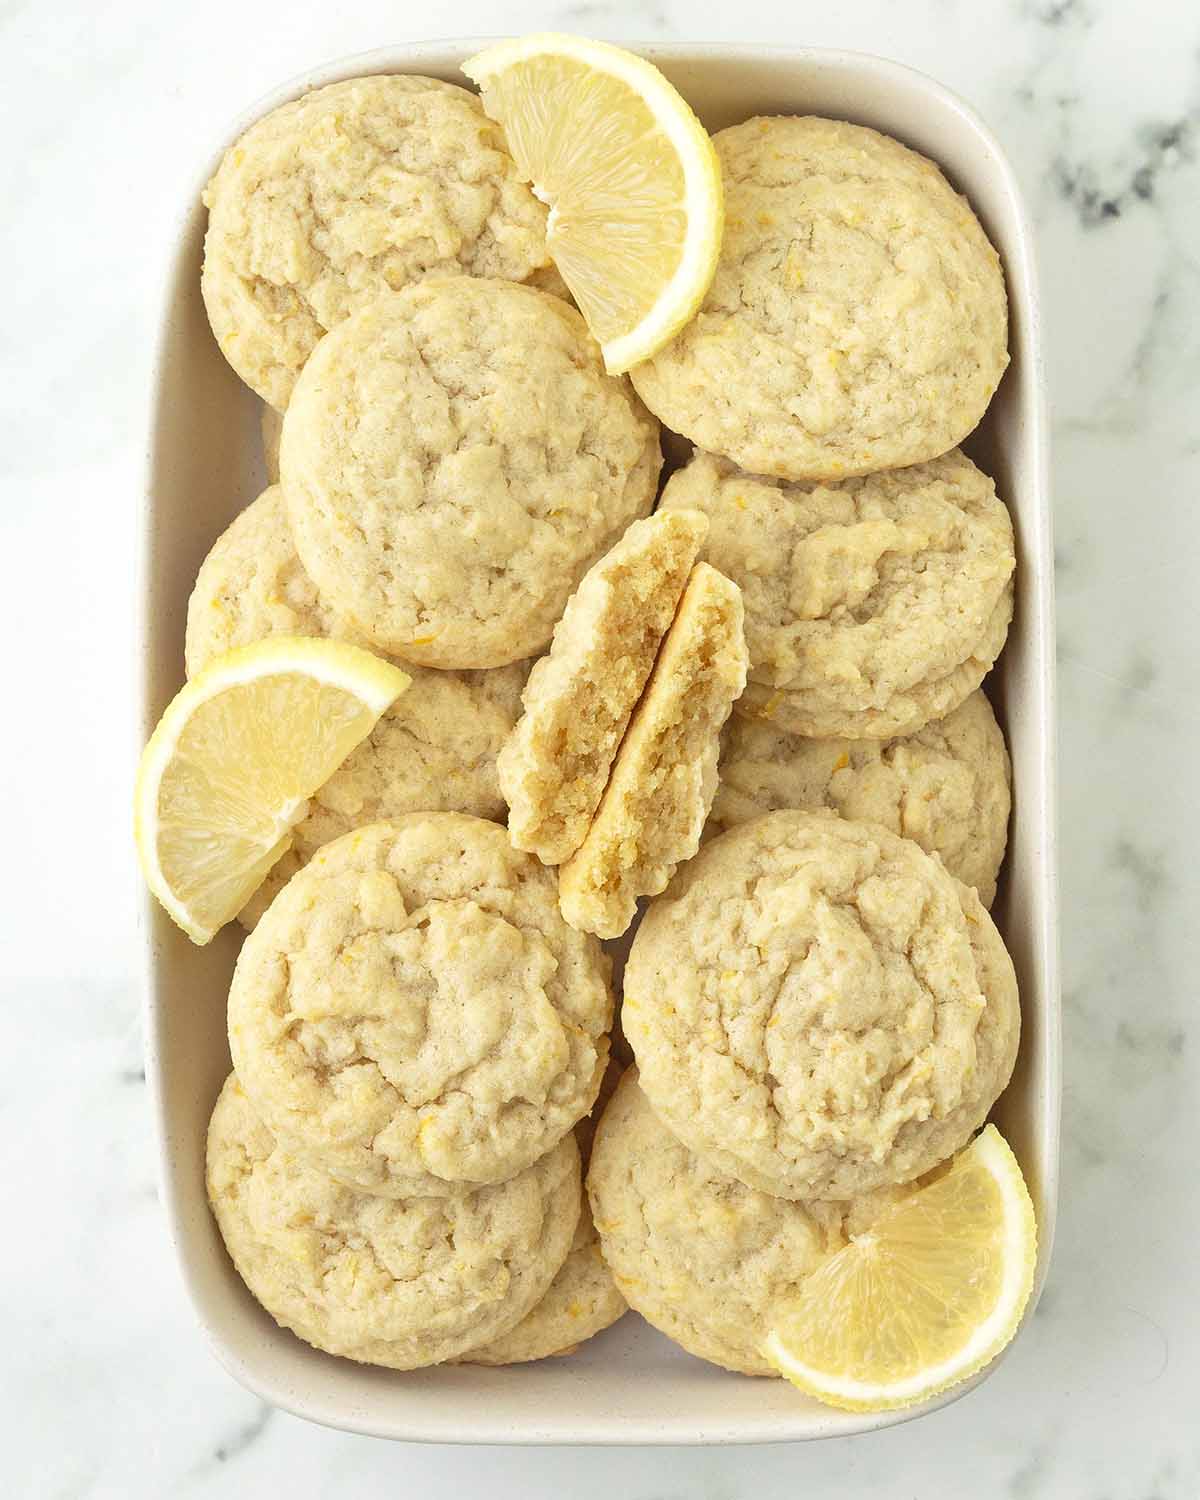 An overhead image of eggless lemon cookies in a dish, one cookie is split in half to show the soft inside.